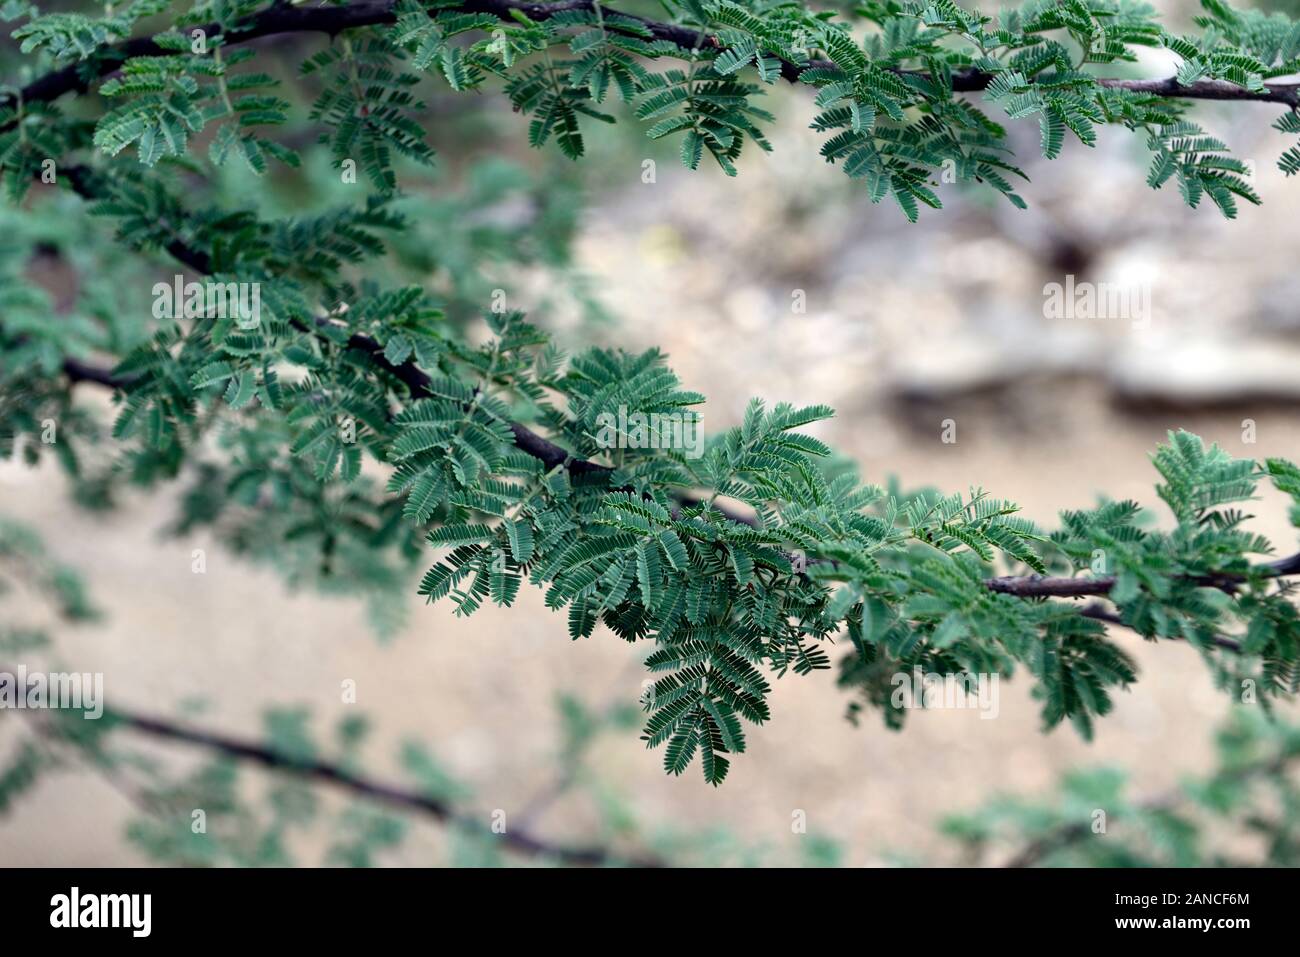 Vachellia reficiens,acacia reficiens,red-bark acacia, red thorn,false umbrella tree,false umbrella thorn,namibian tree,trees,leaves,foliage,RM Floral Stock Photo